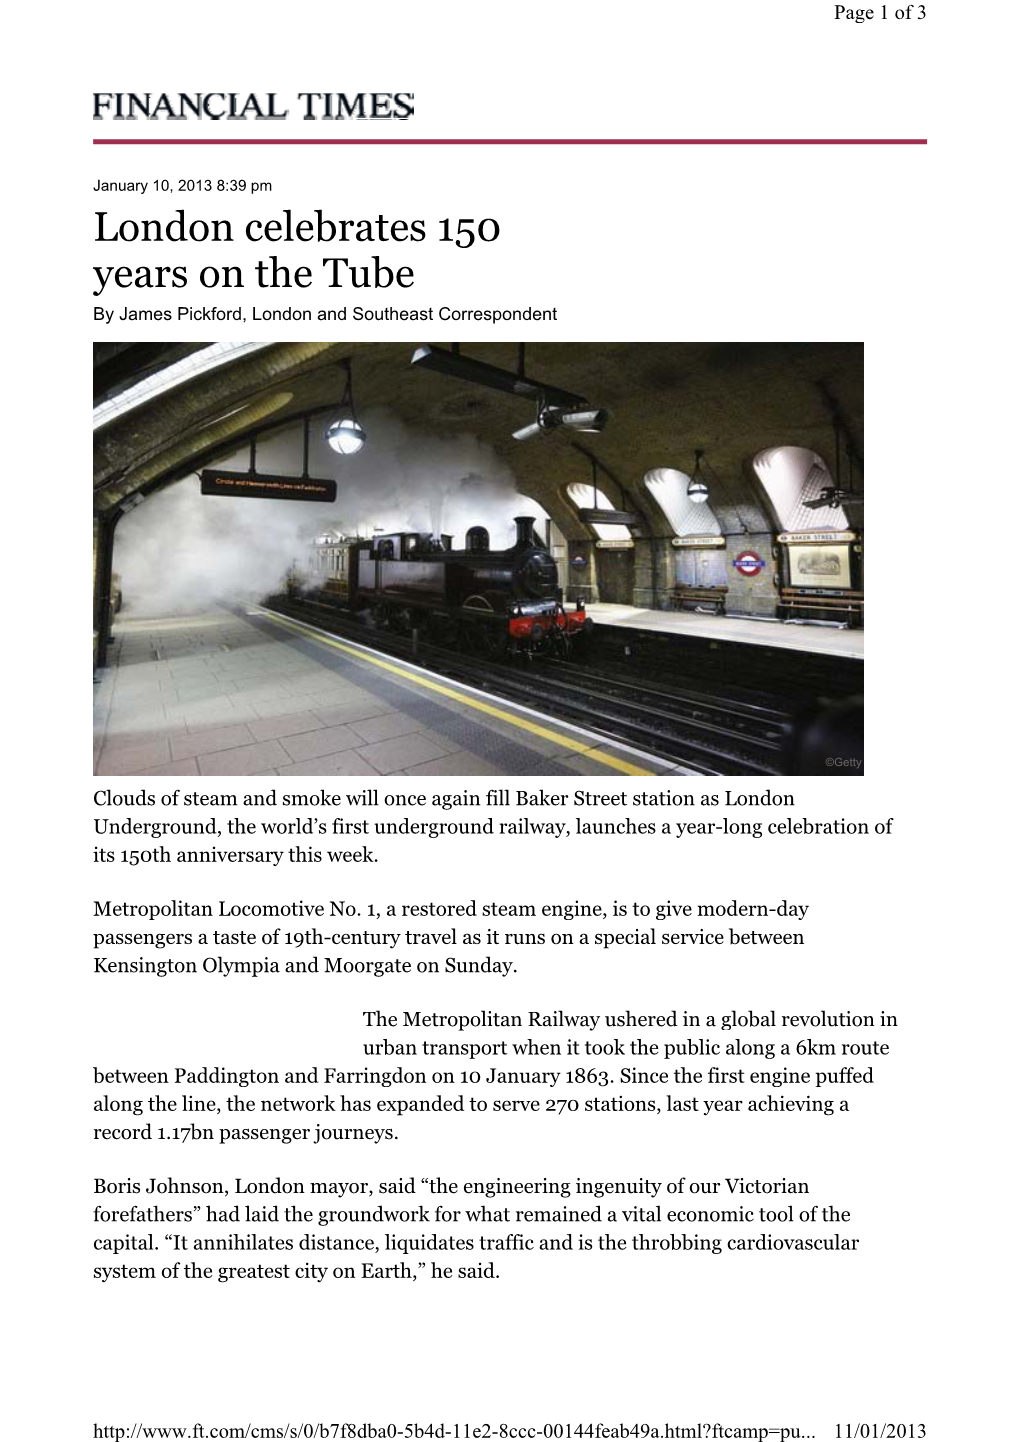 London Celebrates 150 Years on the Tube by James Pickford, London and Southeast Correspondent